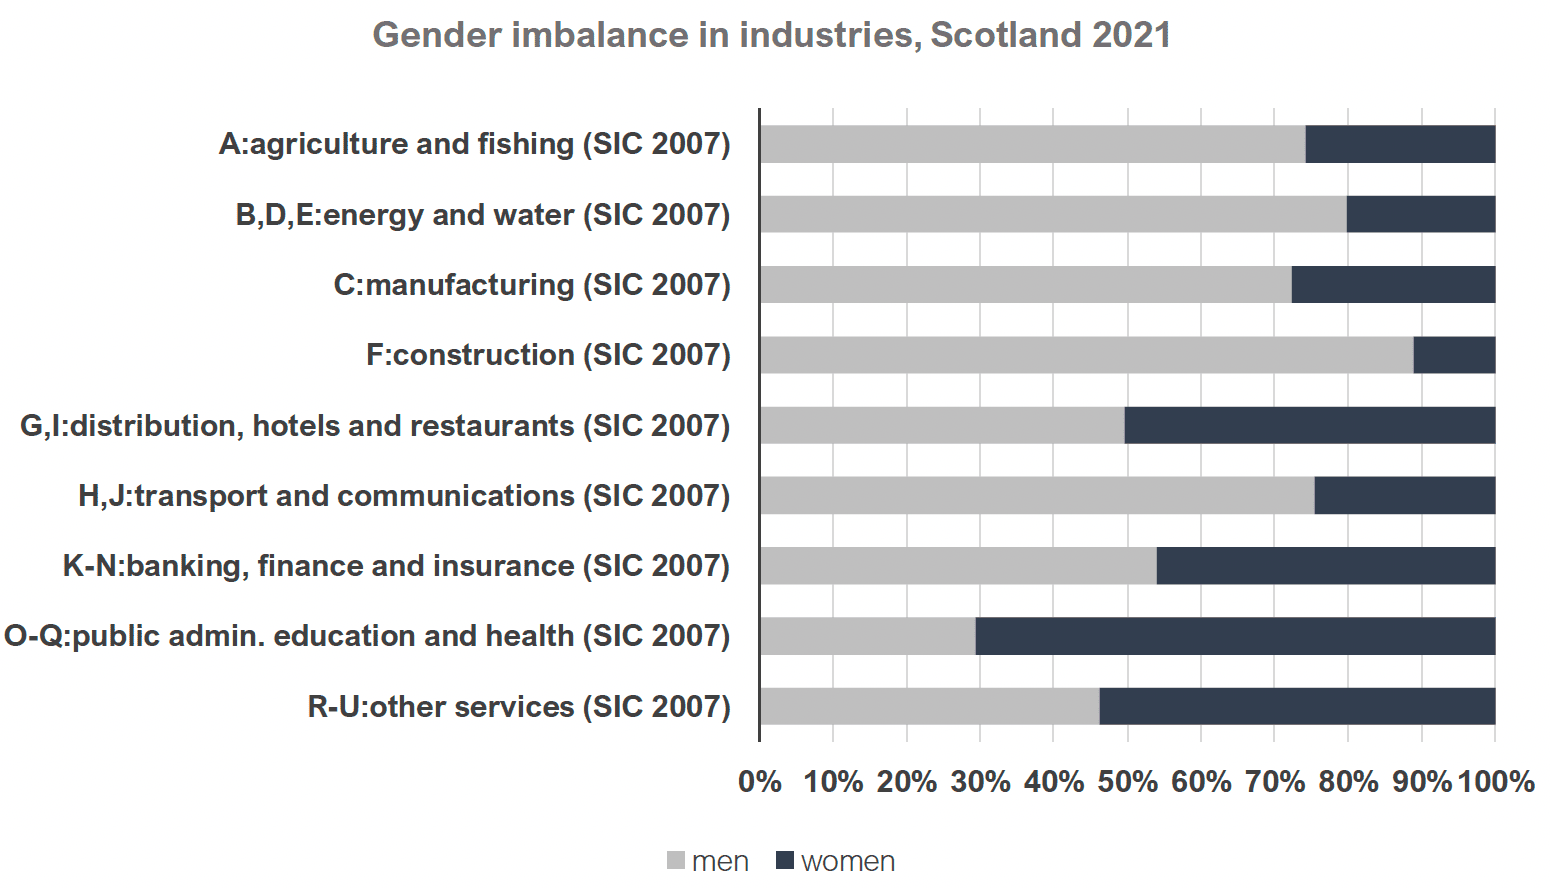 Graph depicts the gender imbalance among workers in different industries in Scotland in 2021. Among workers in agriculture and fishing 74.3% were men, and 25.7% were women. Among workers in the Energy and Water industries 79.9% were men, and 20.1% were women. Among workers in manufacturing 72.4% were men, and 27.6% were women. Among workers in construction 88.8% were men, and 11.2% were women. Among workers in the distribution, hotels, and restaurants industry 49.7% were men, and 50.3% were women. Among workers in the transport and communications industries, 75.4% were men, and 24.6% were women. Among workers in banking, finance, and insurance, 54% were men, and 46% were women. Among workers in public admin, education, and health, 29.4% were men, and 70.6% were women. Finally, among sectors classified as other services, 46.2% of workers were men, and 53.8% of workers were women.